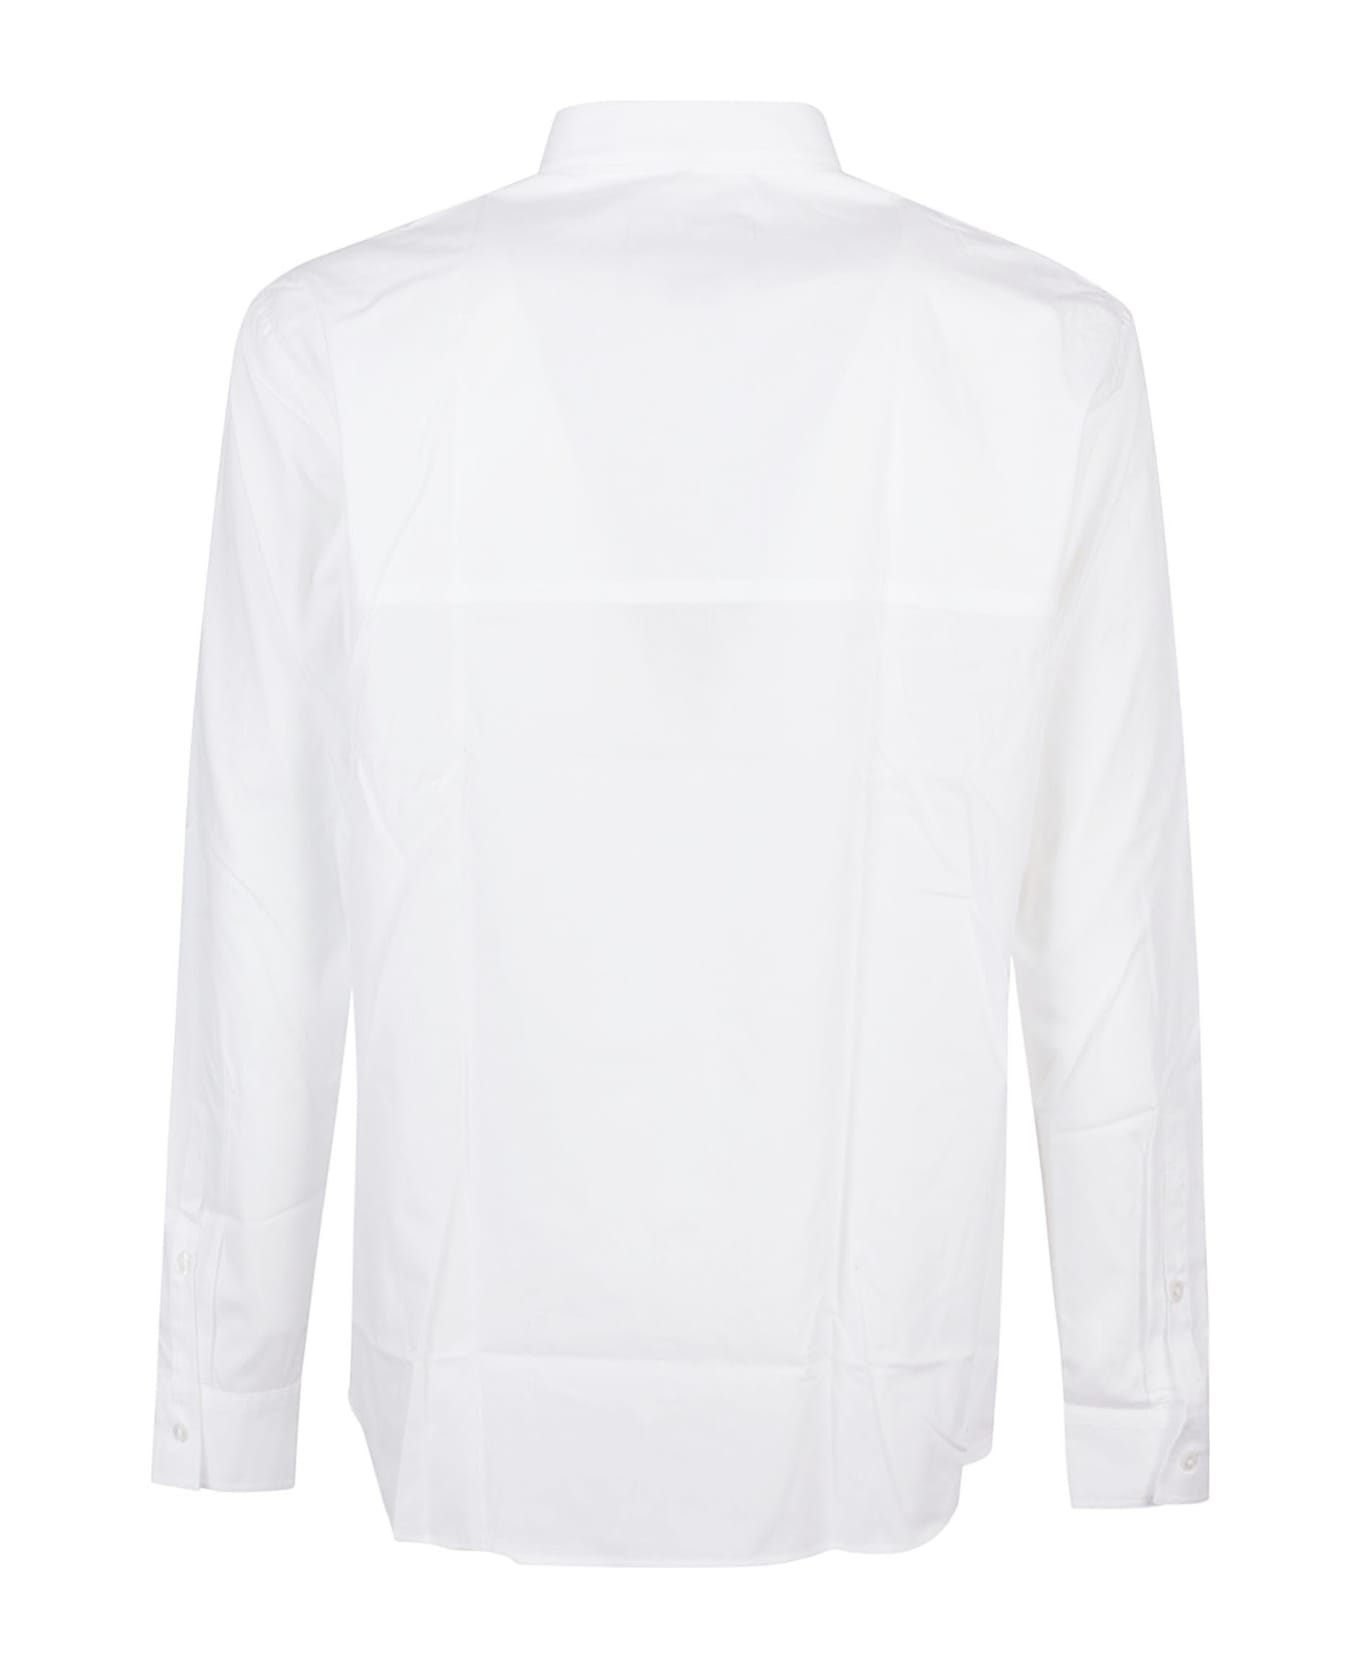 Versace Jeans Couture Patch Logo Basic Shirt - White